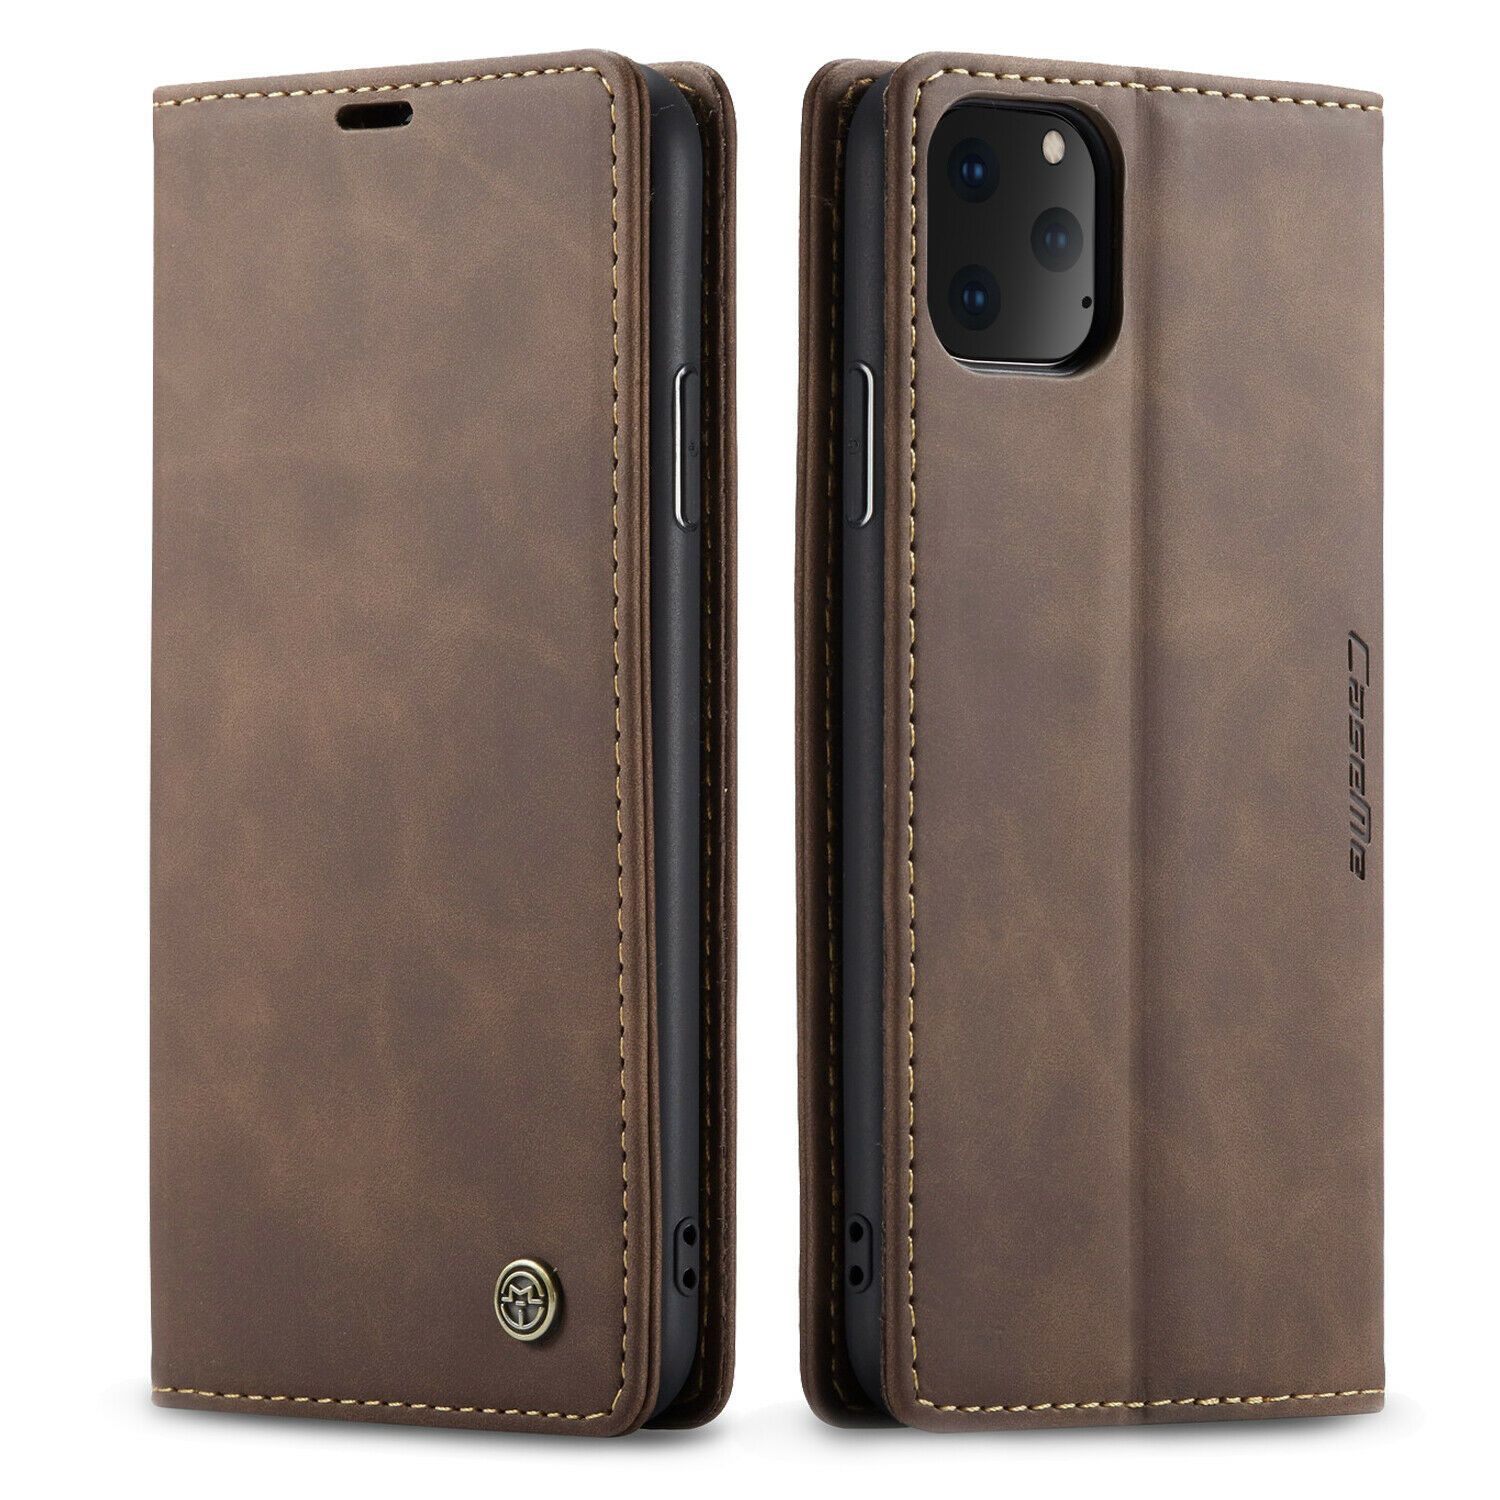 iPhone 11 Pro XS Max XR X 8 7 Plus Case Magnetic Leather Wallet Flip Stand Cover 2000eseller For Apple iPhone XS Max Coffee 